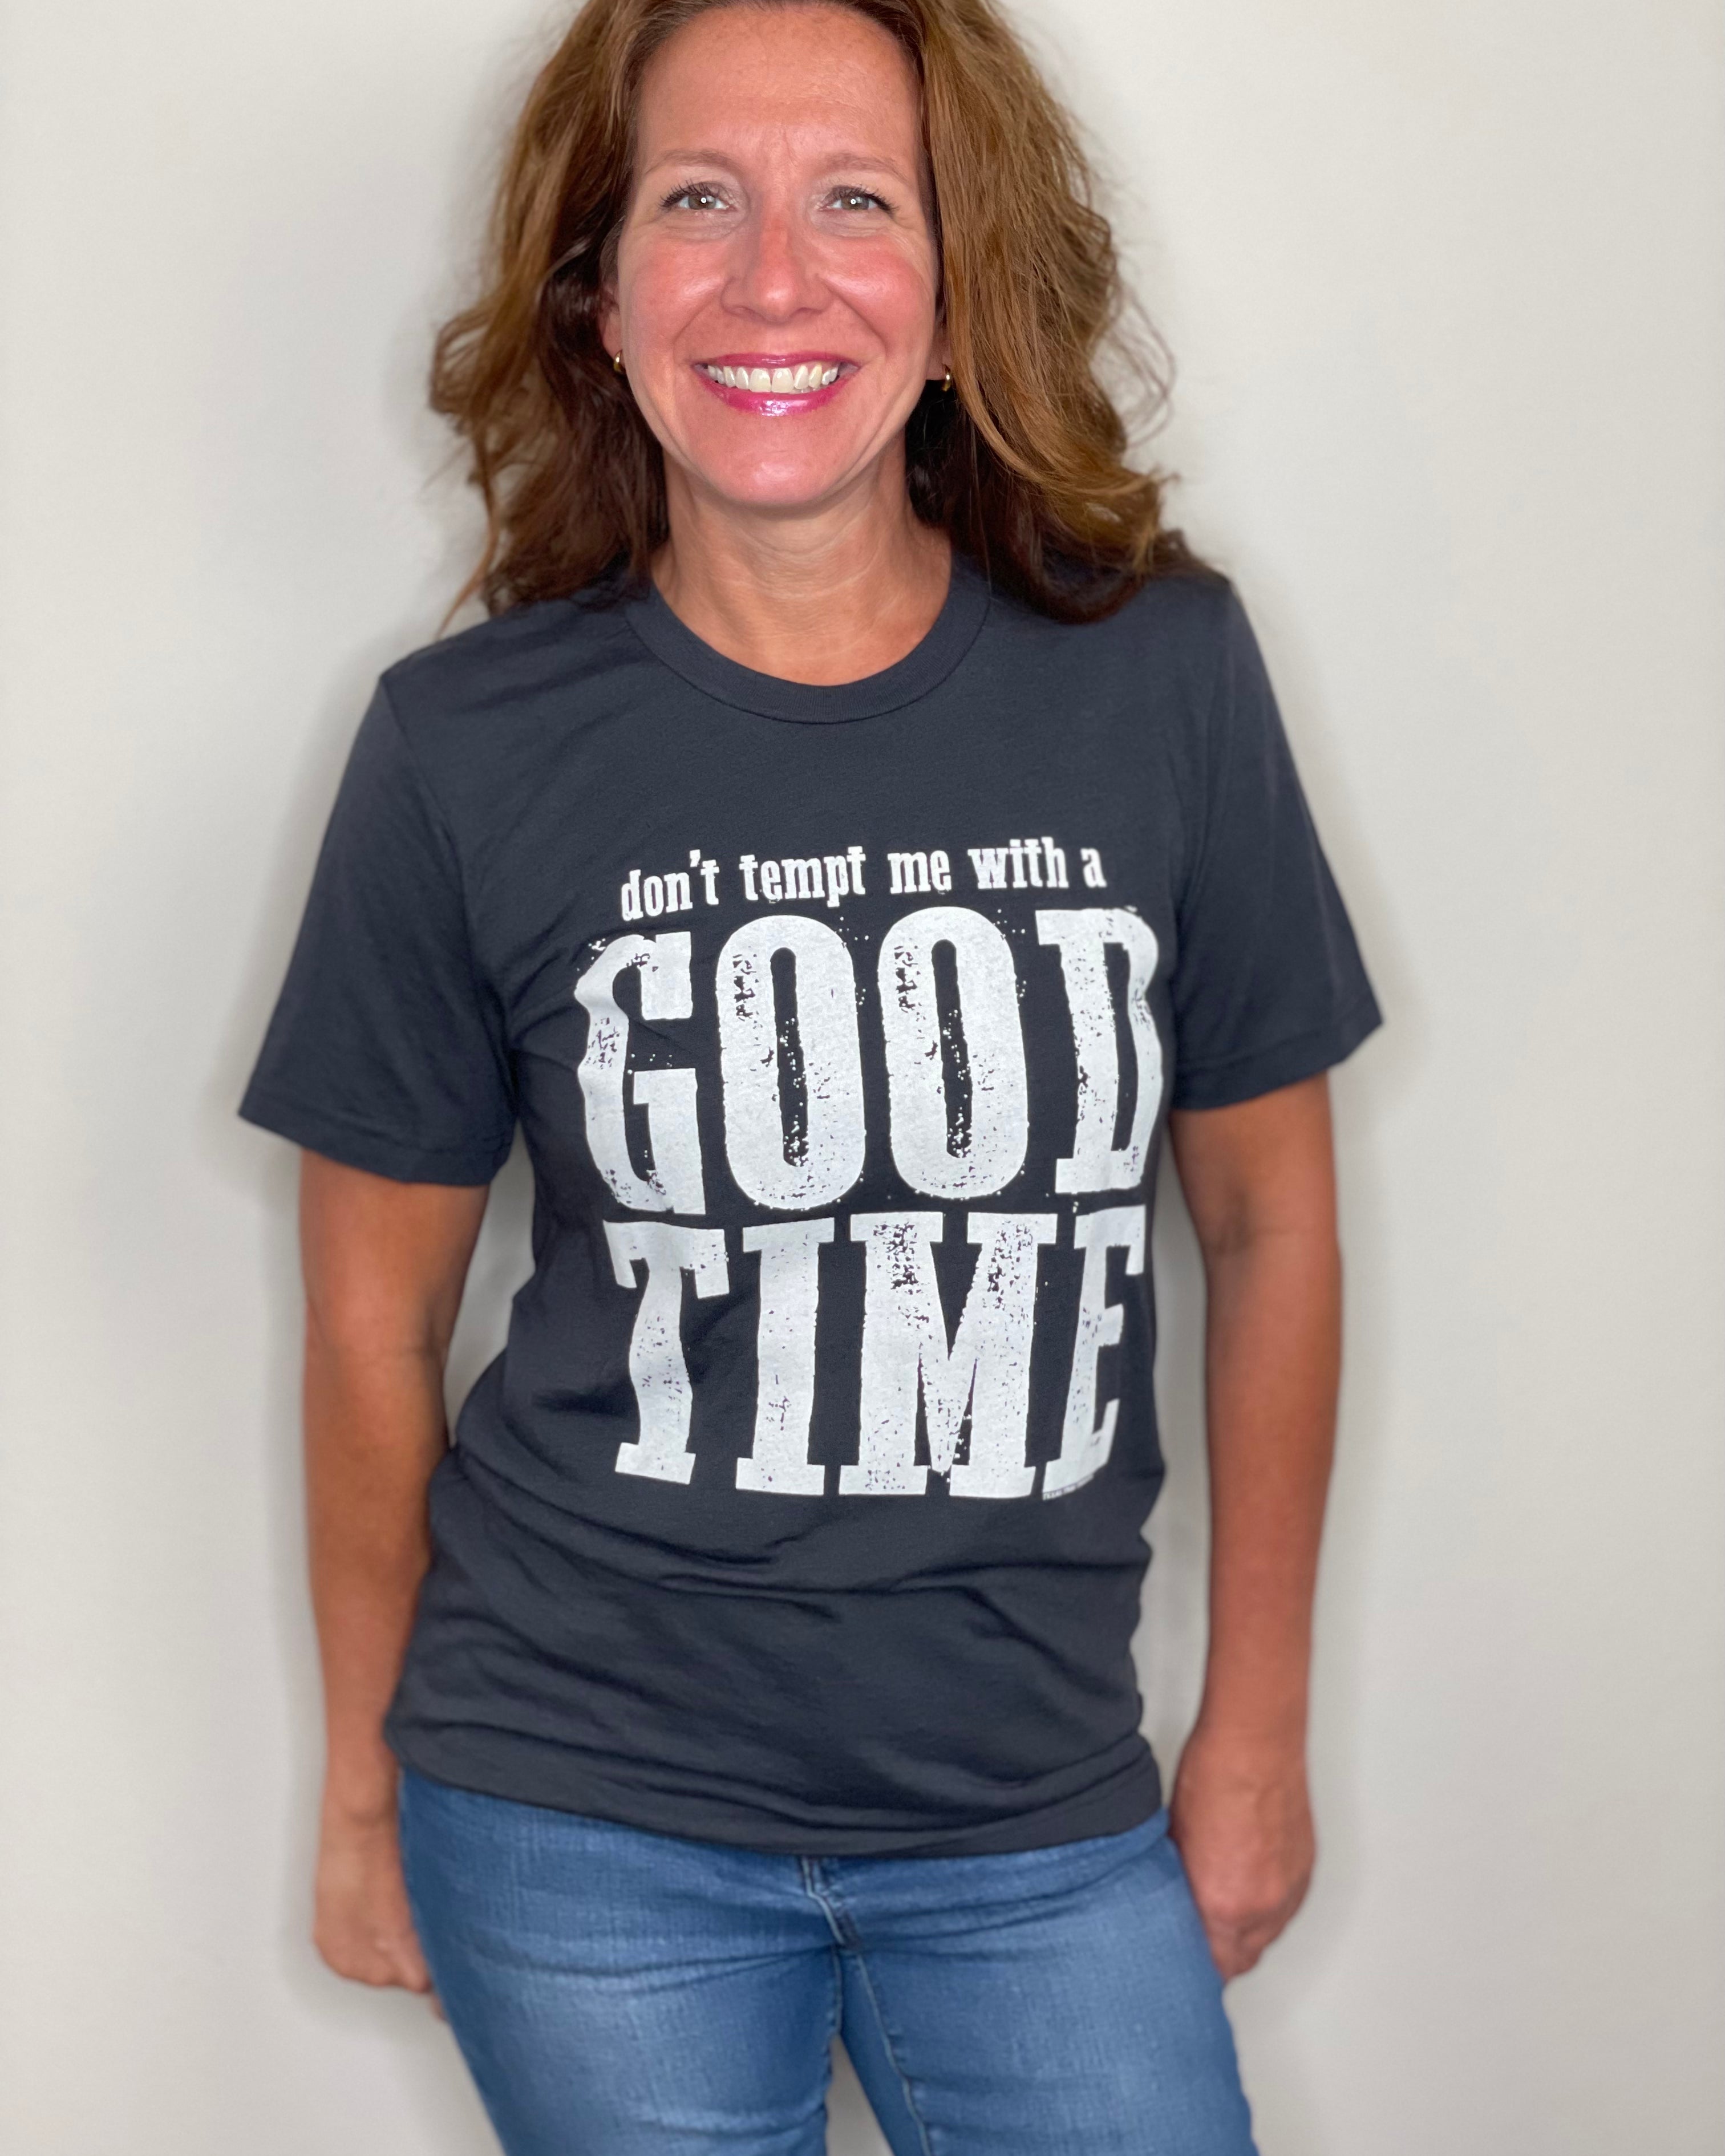 Don’t Tempt Me With a Good Time T Shirt.